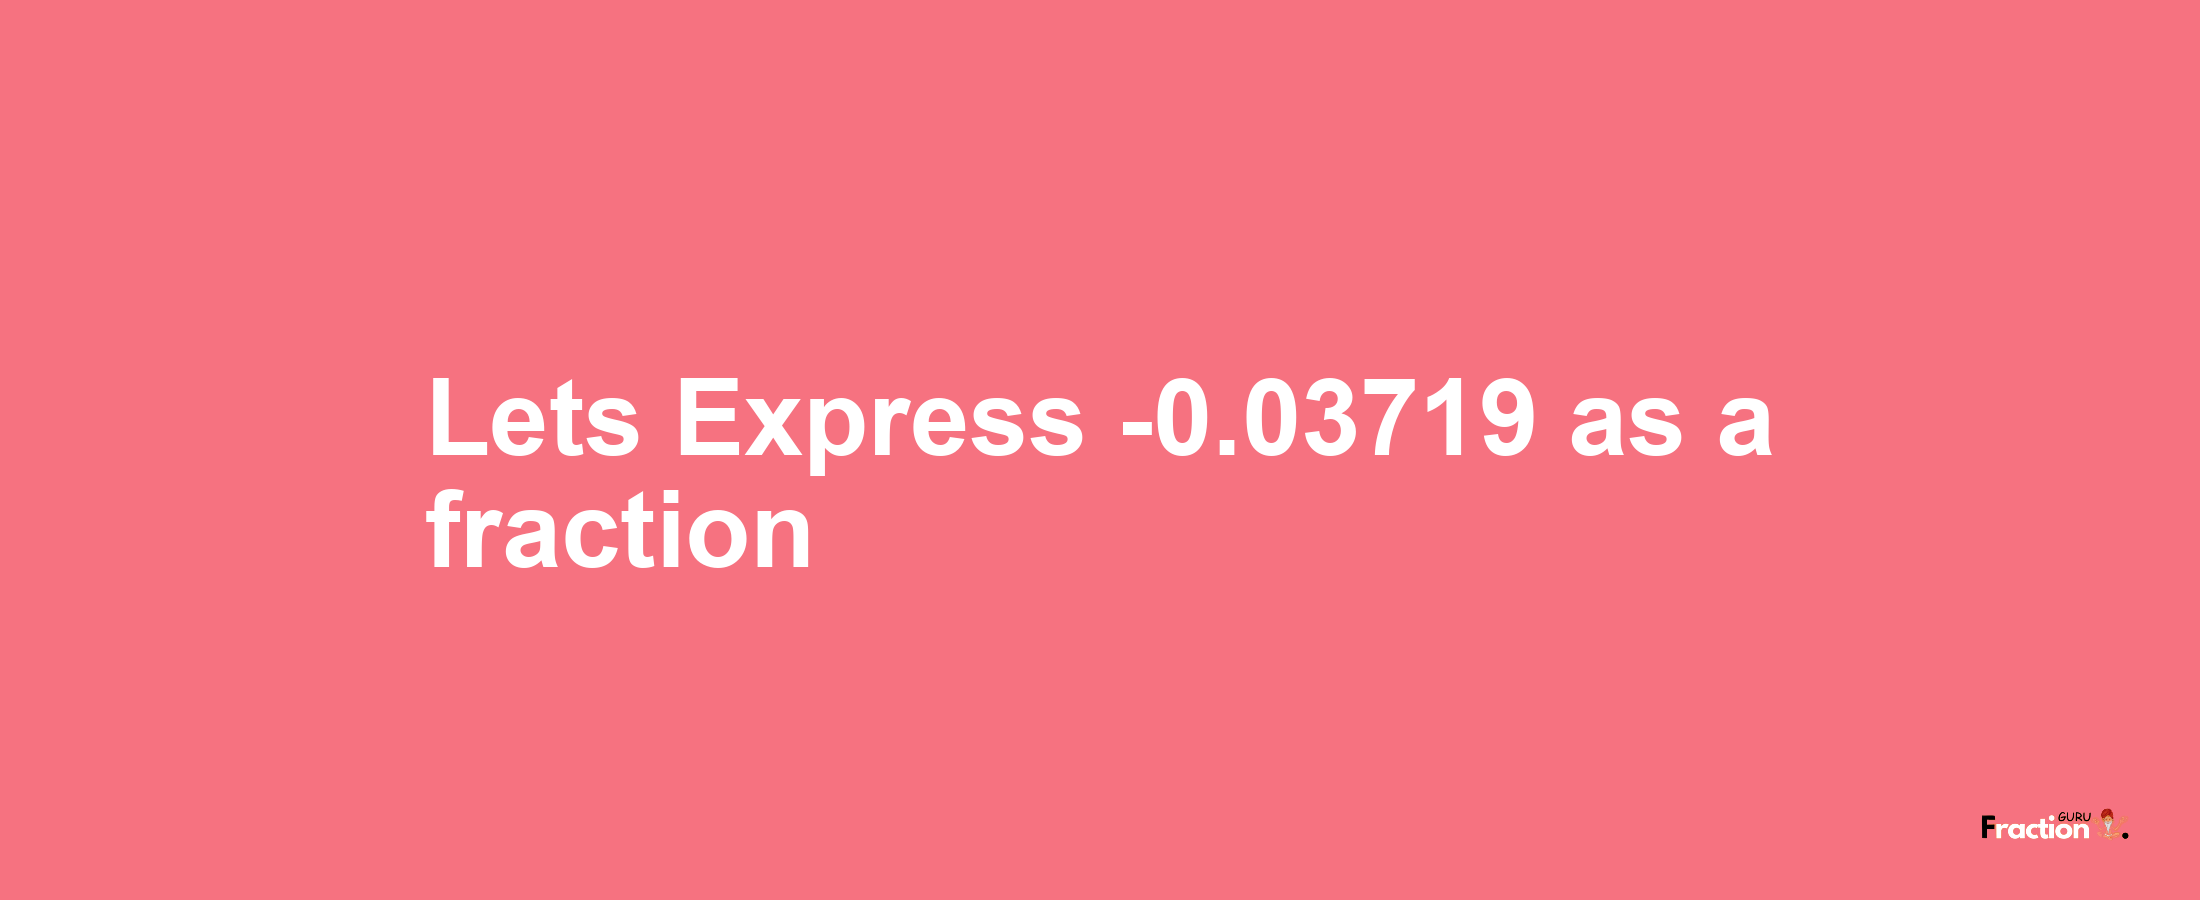 Lets Express -0.03719 as afraction